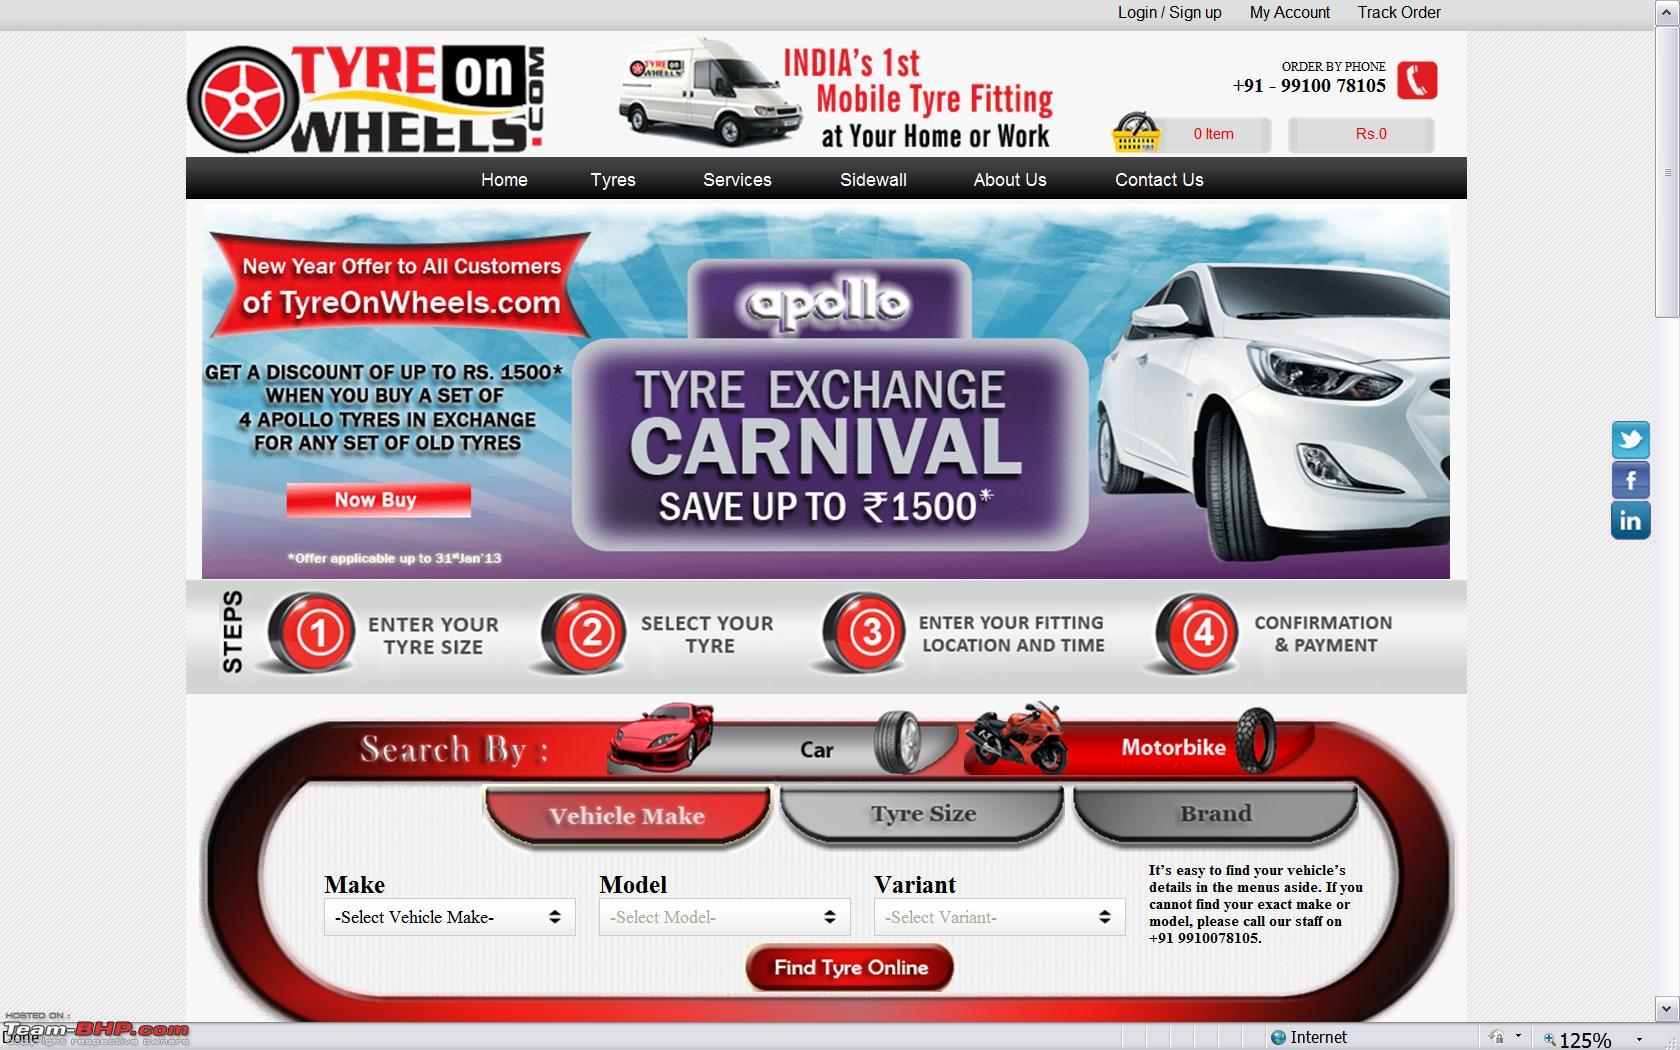 Download this Tyreonwheels Order Tyres Online Fitment Your Home Office picture